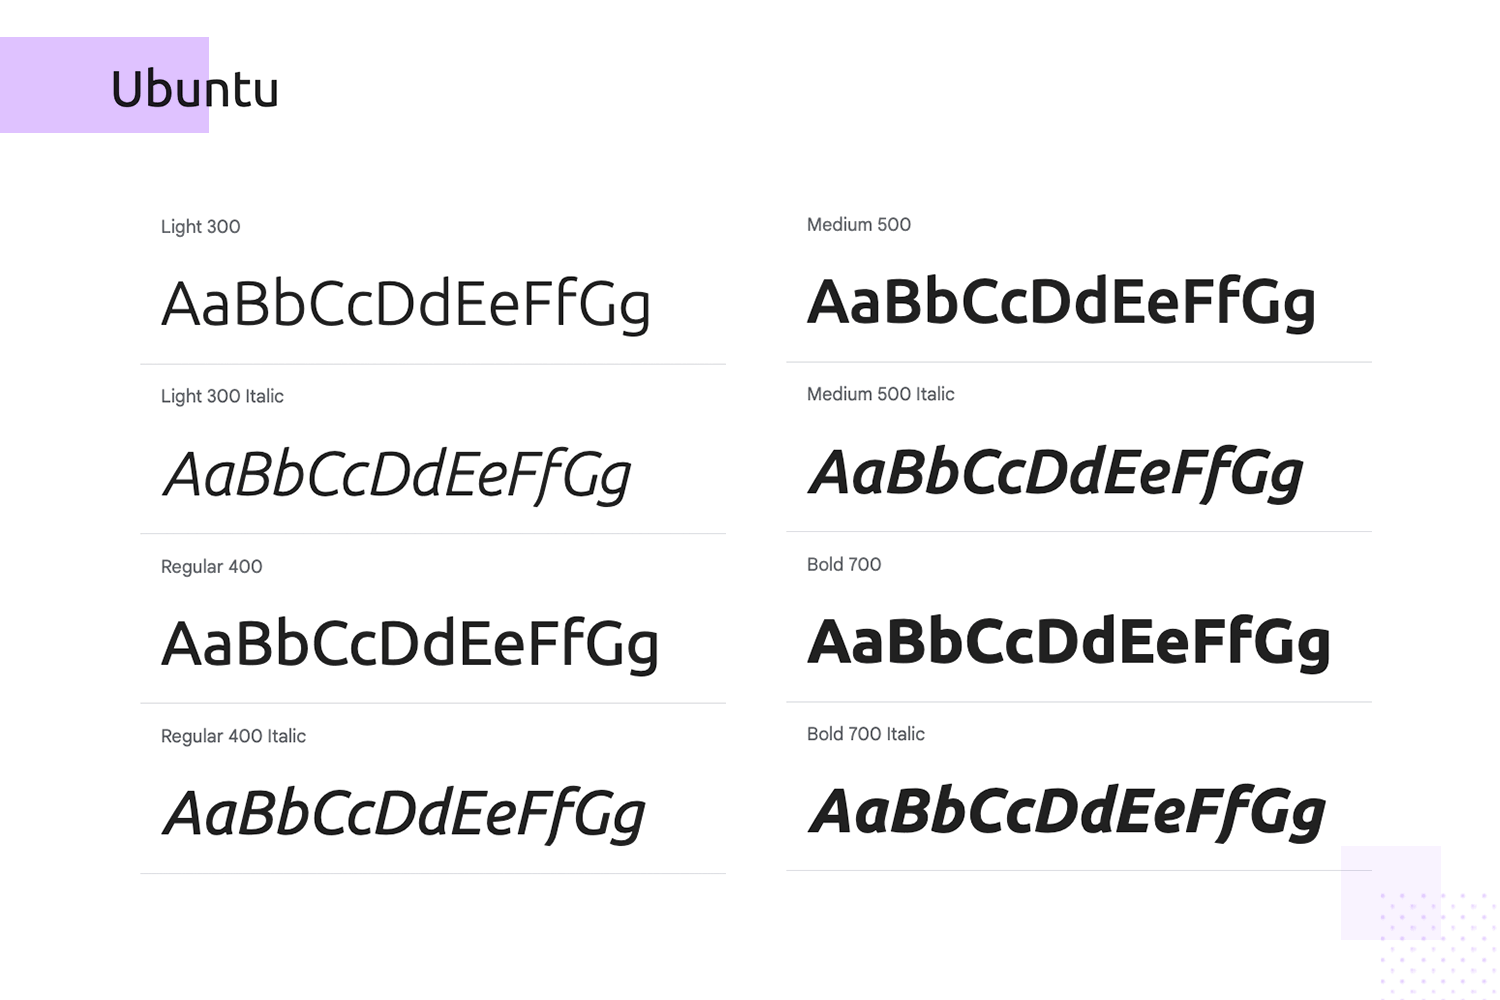 Ubuntu font showcase with weights from Light 300 to Bold 700, including italics